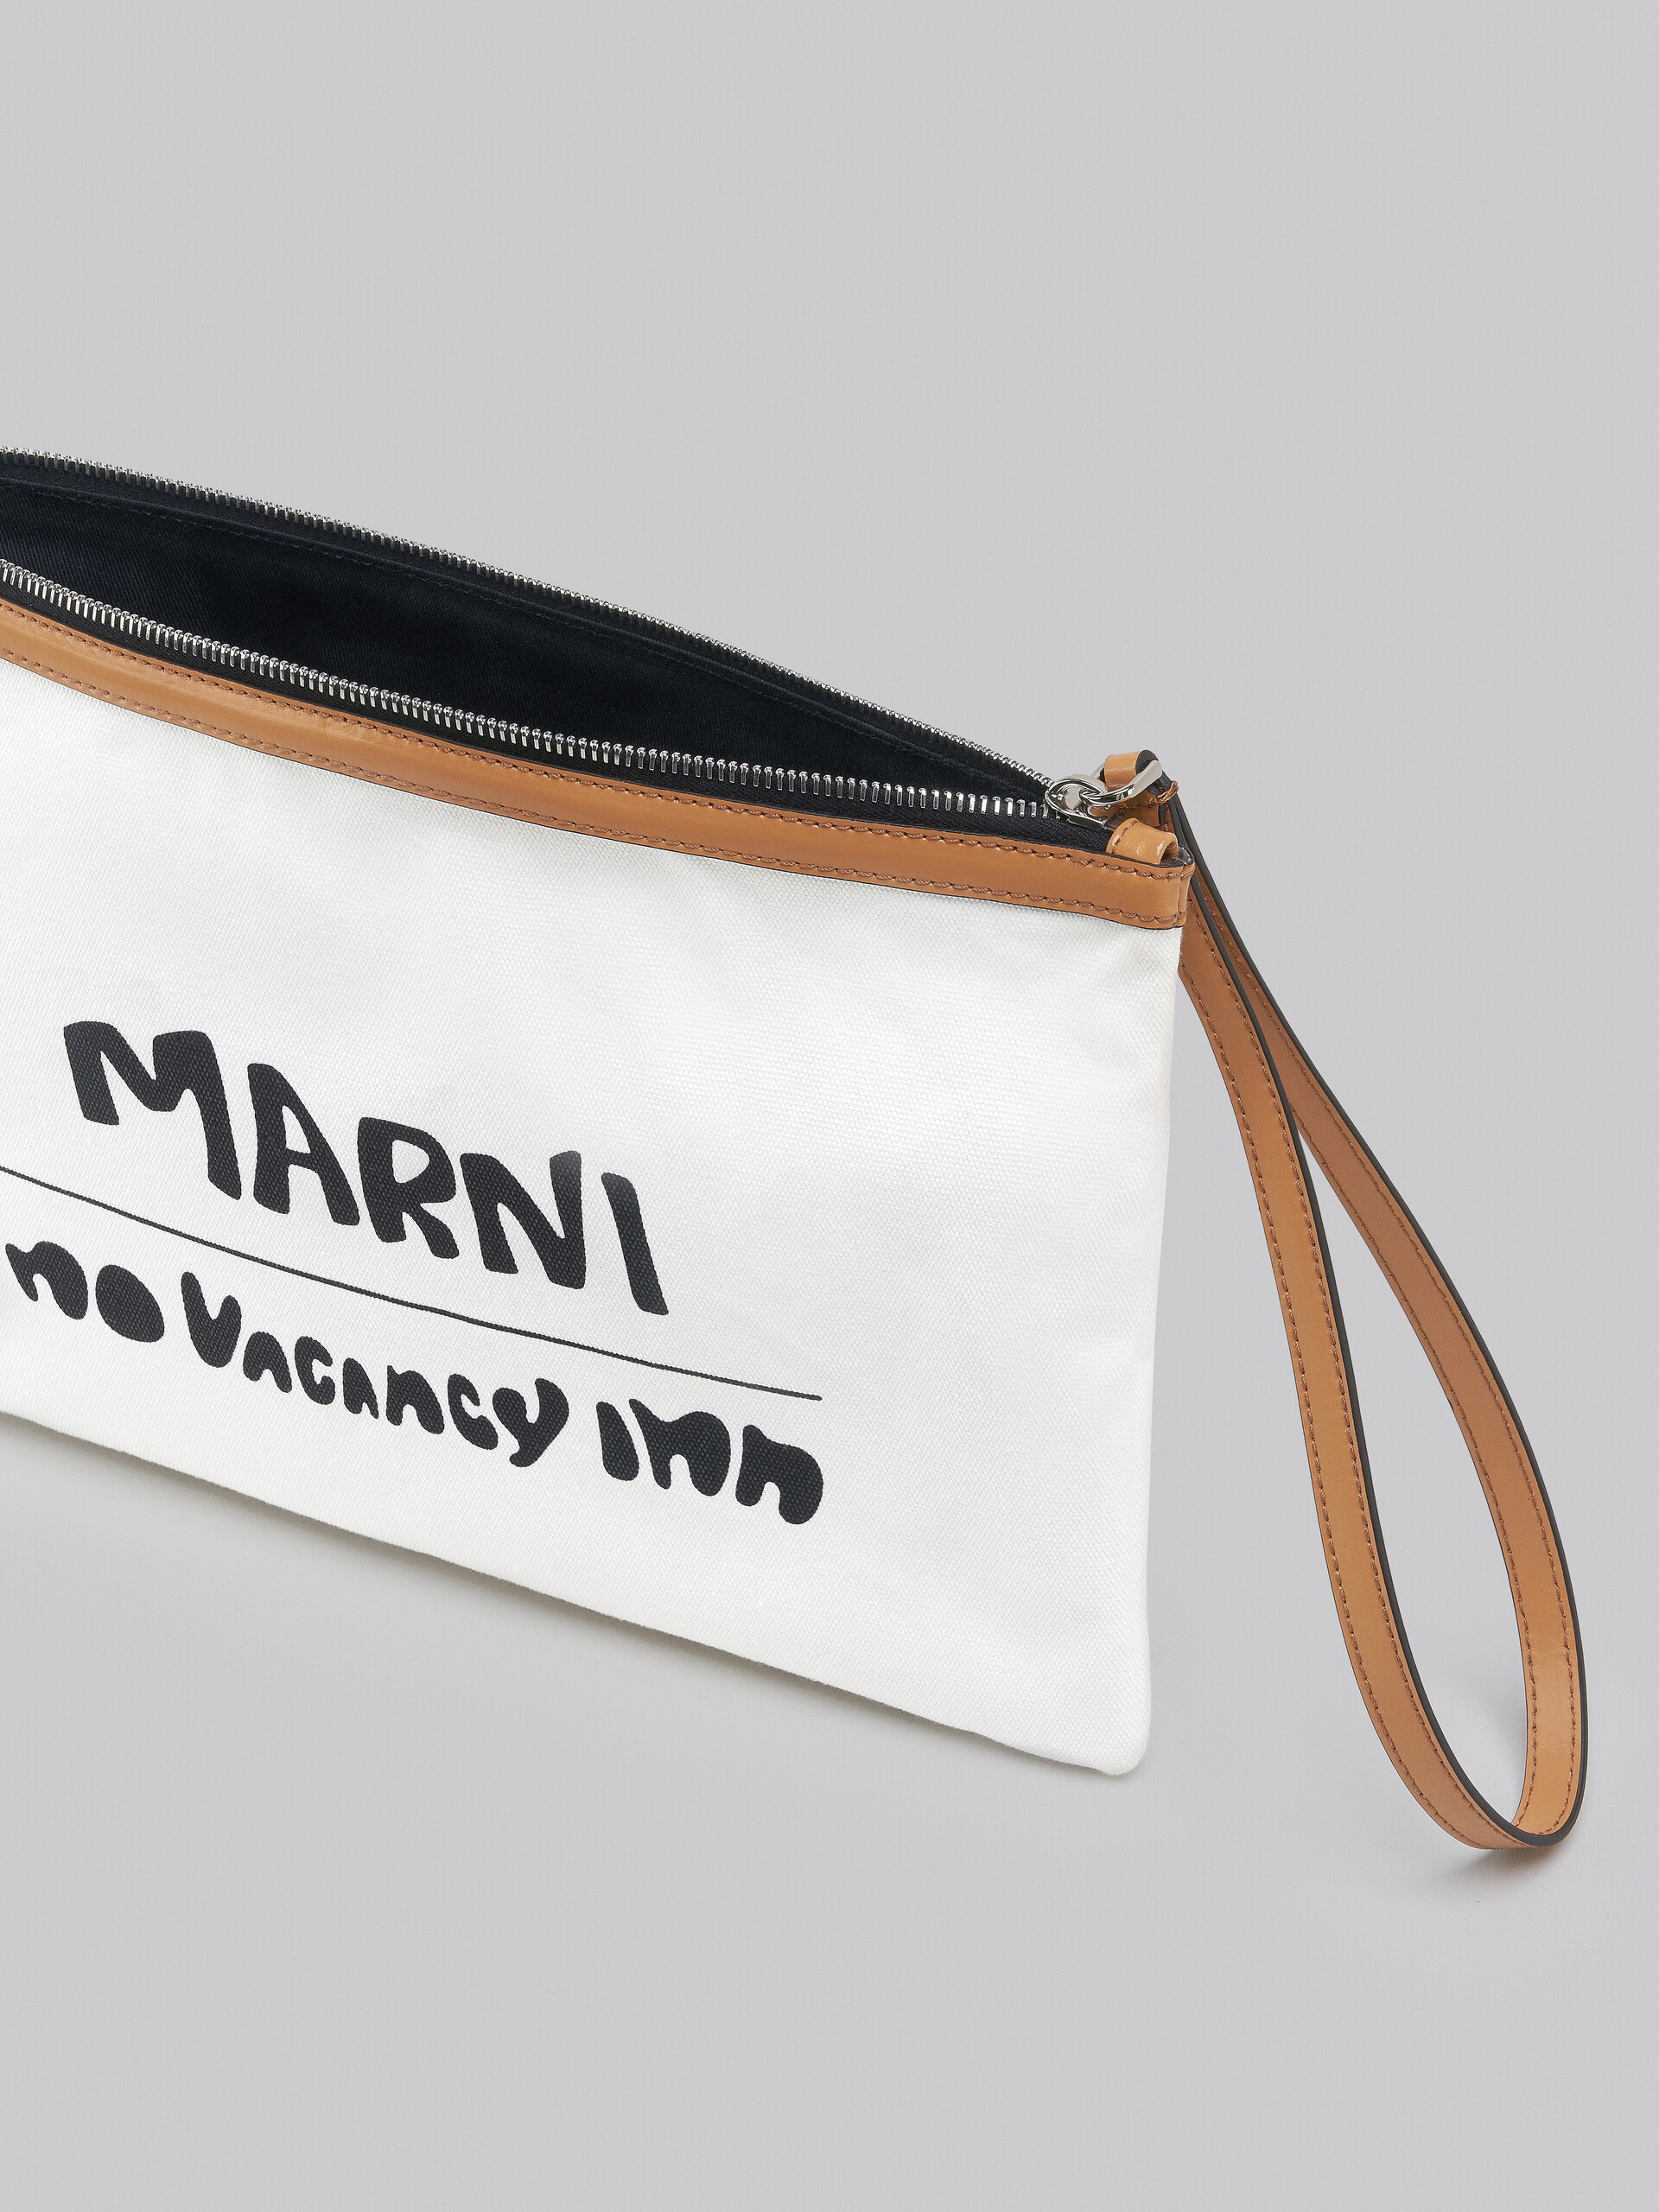 Marni x No Vacancy Inn - Bey Pouch in white canvas with beige trims - Pochette - Image 4